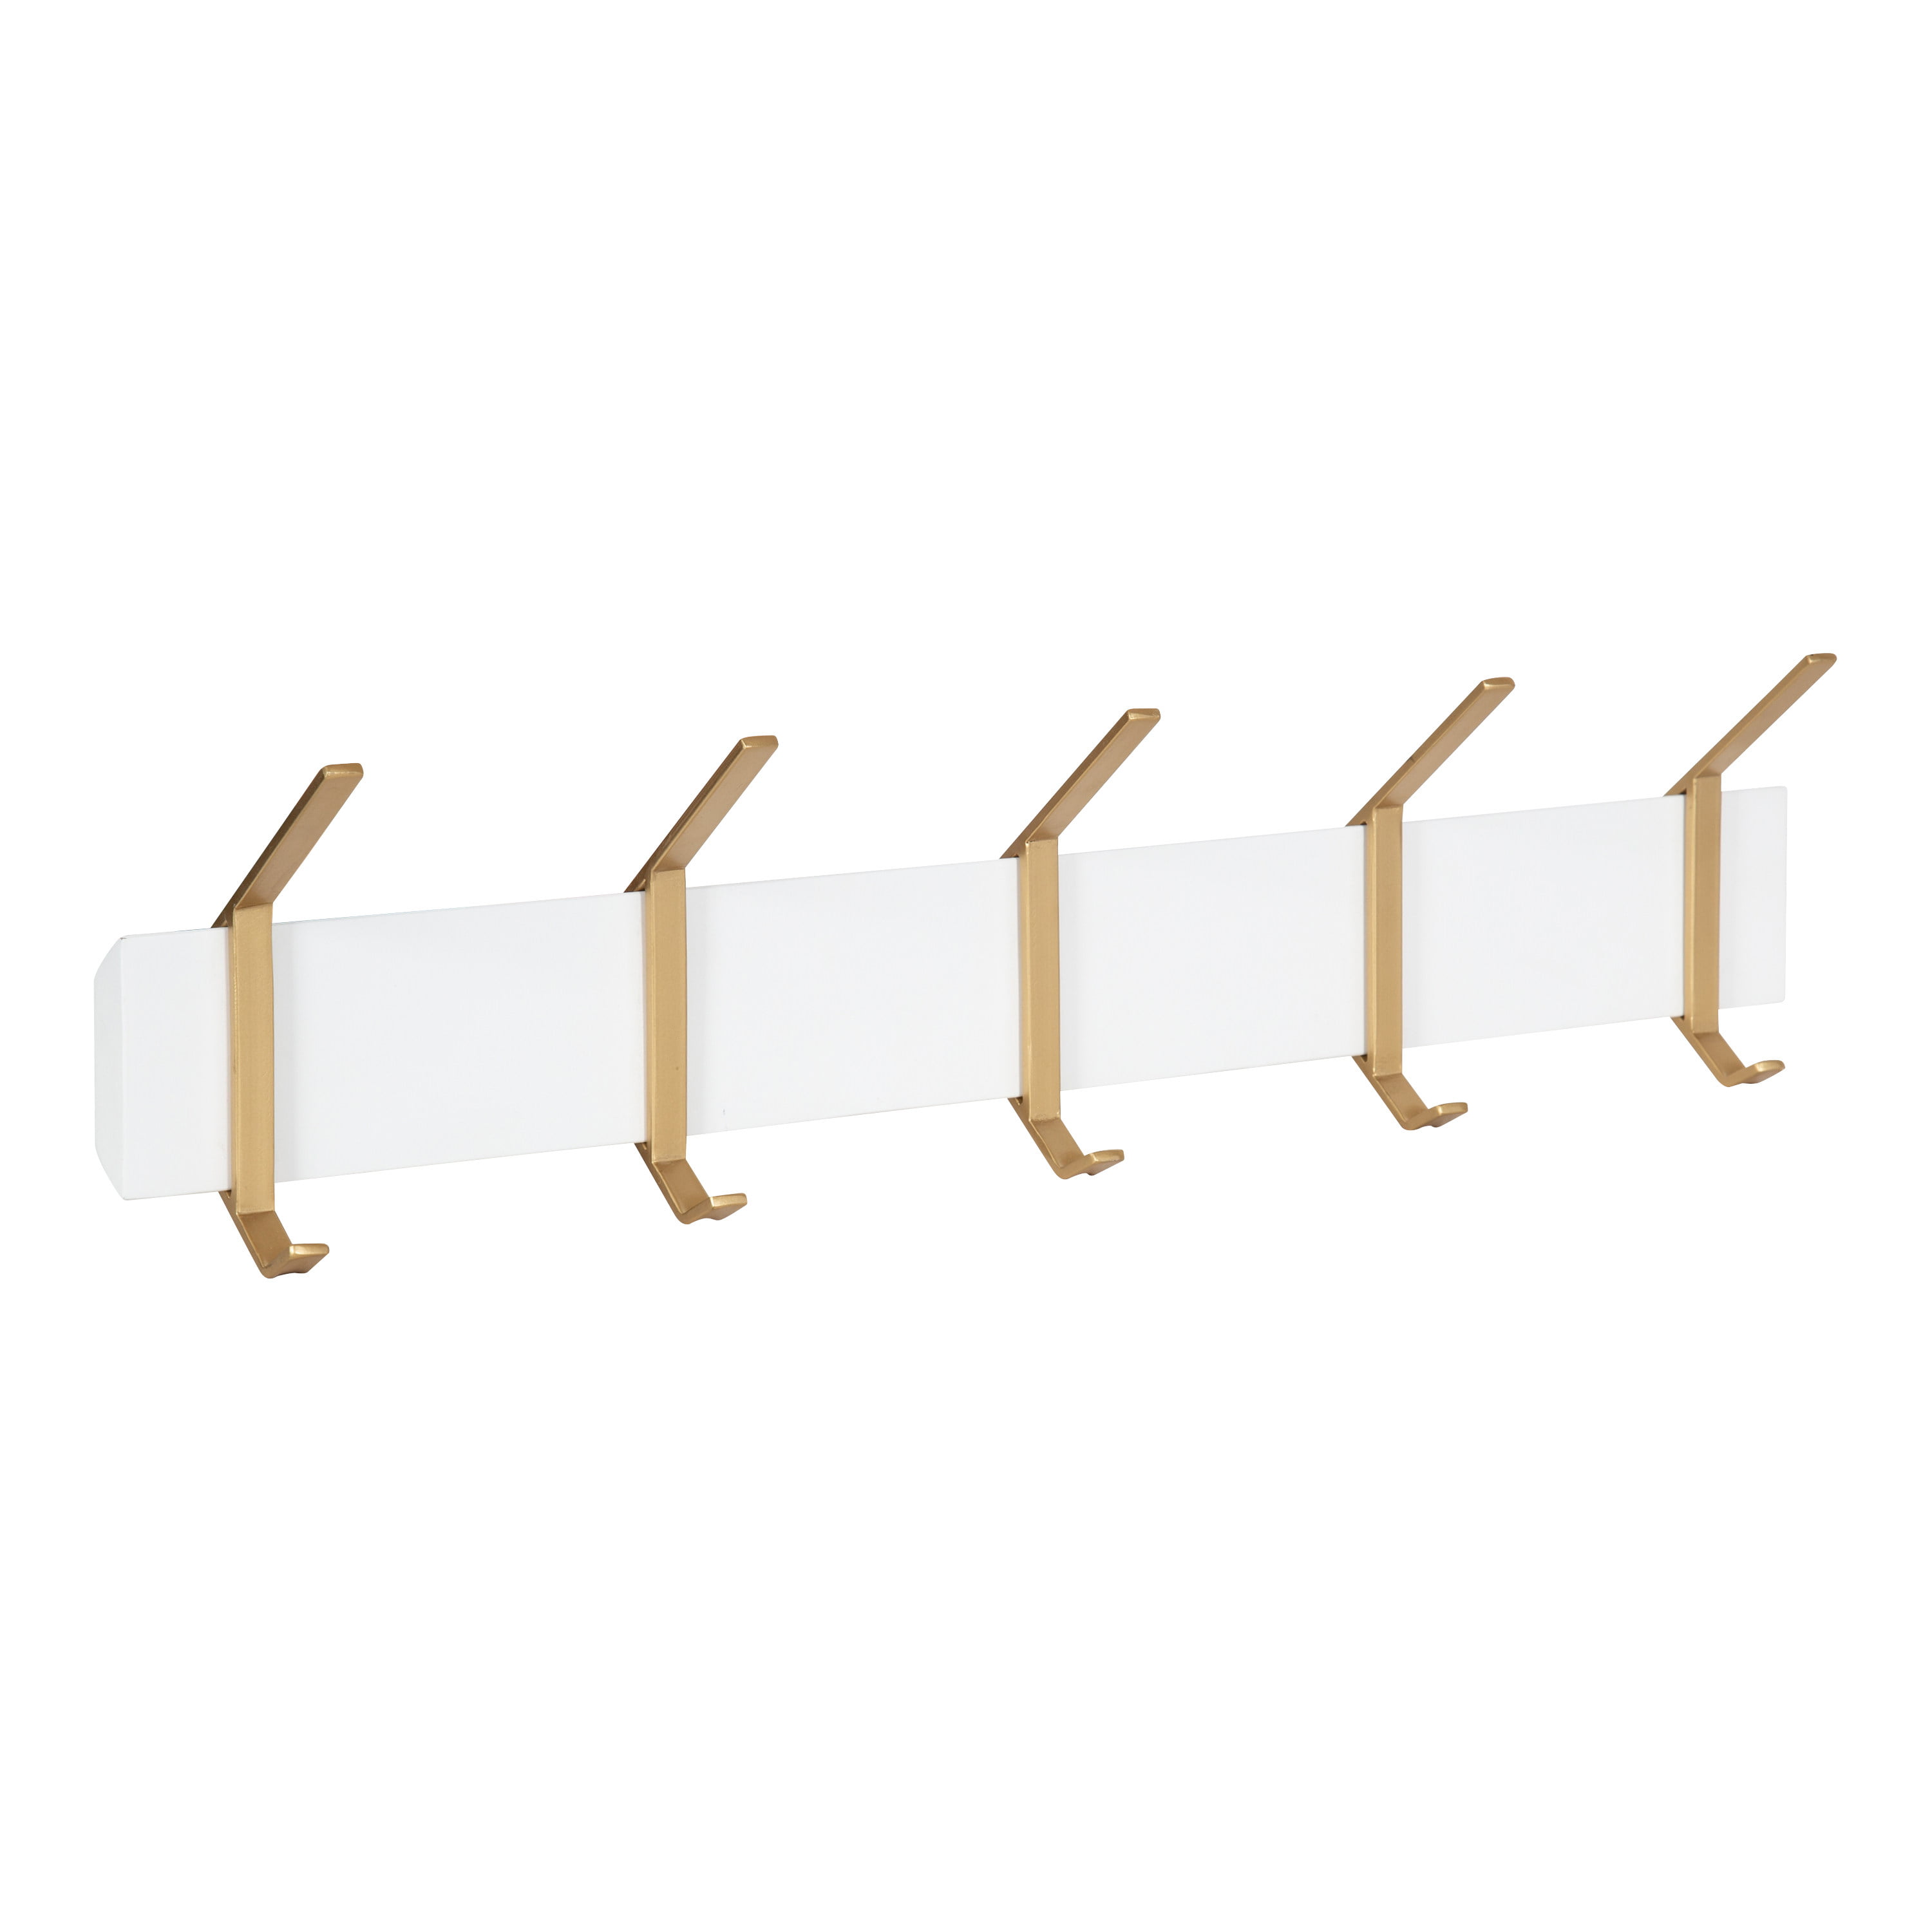 Kate and Laurel Rossmore Modern 5-Hook Wall Hanging Coat Rack, White and  Gold, Decorative Modern Wood and Metal Double Sided Hanging Hooks for Wall